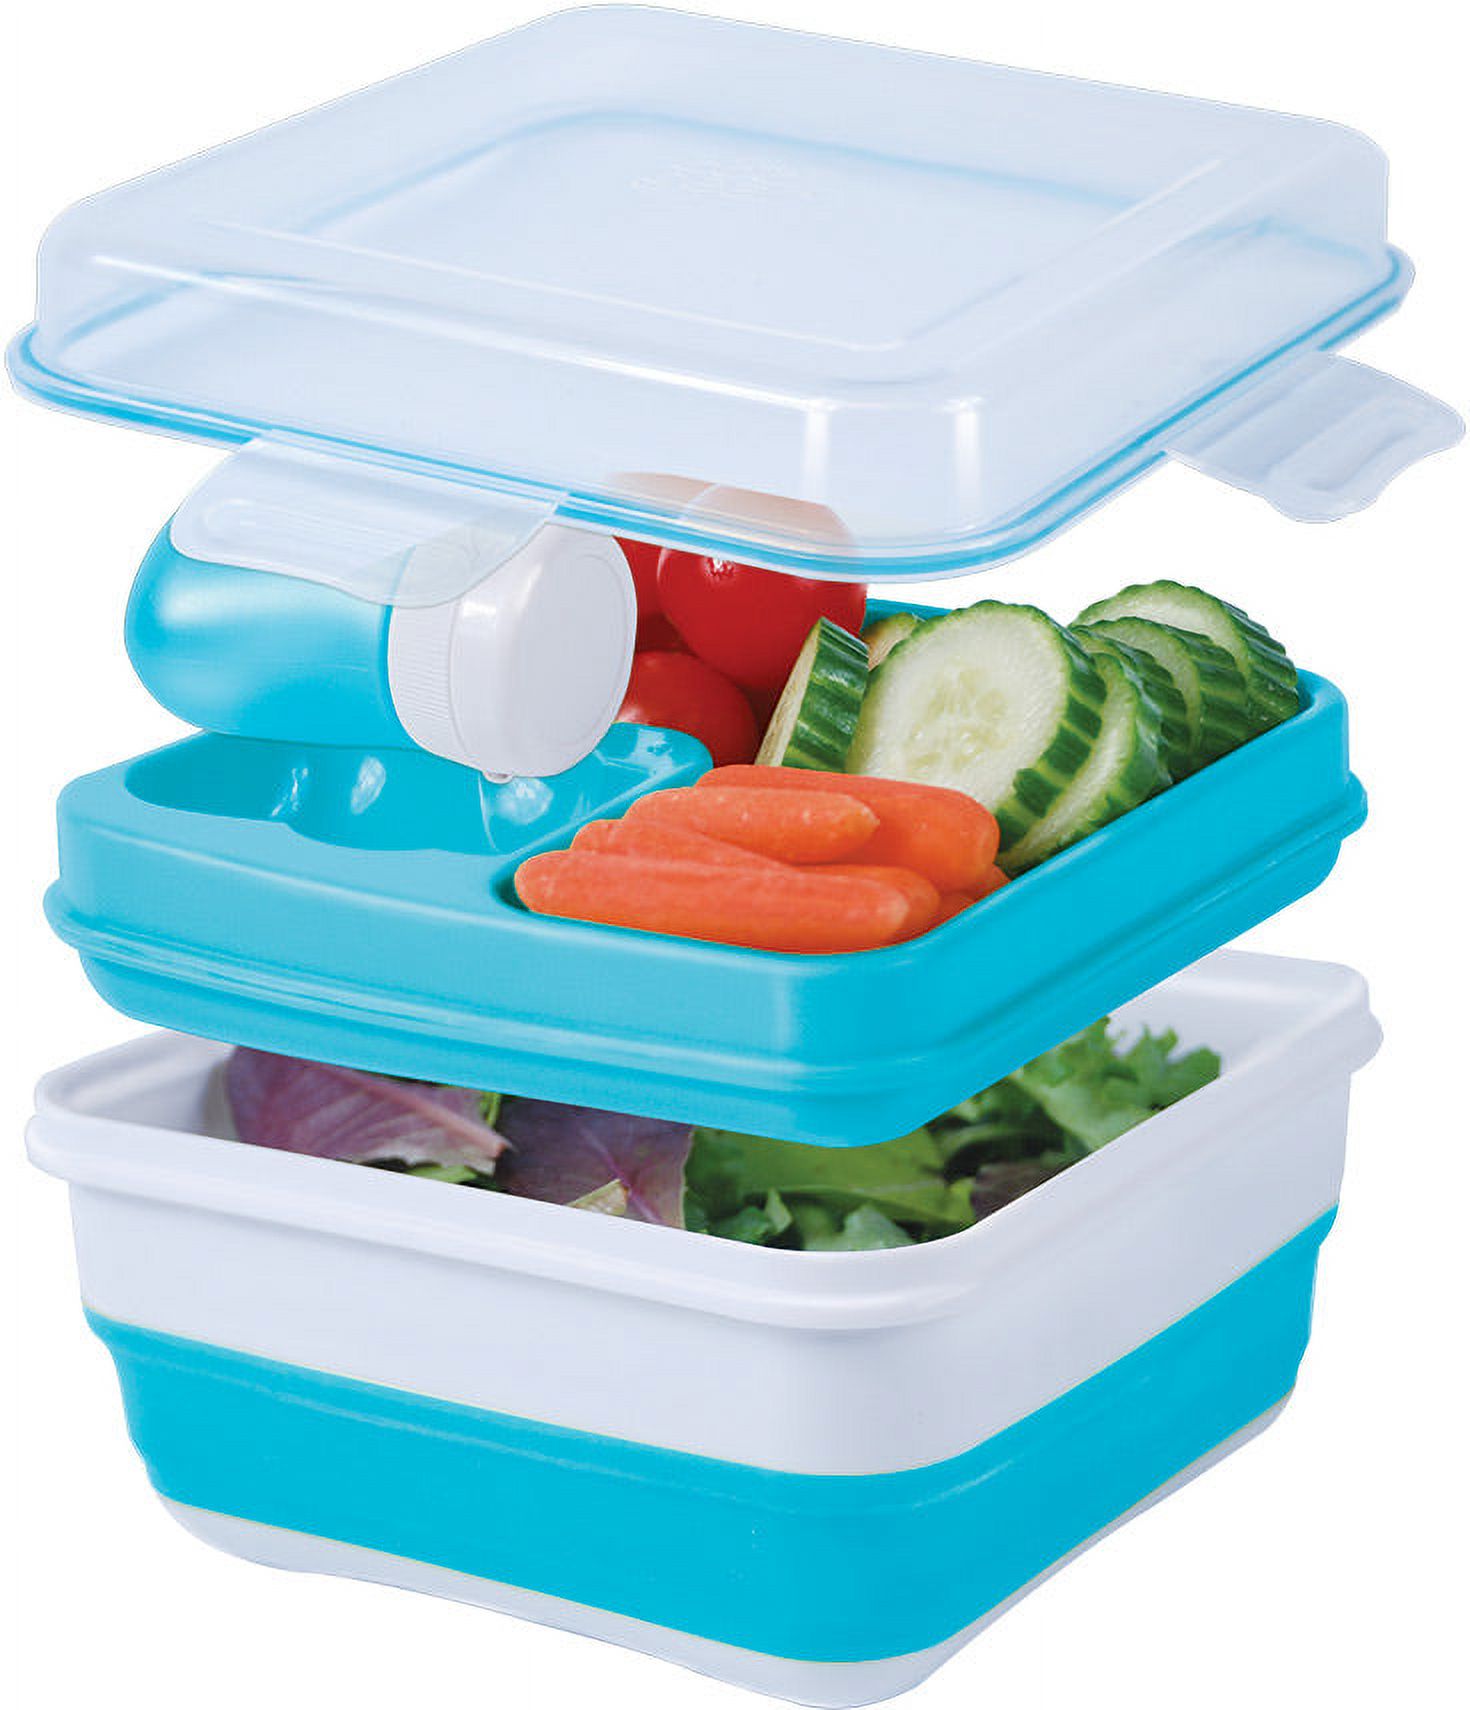 COOL GEAR 2-Pack Large Expandable To-Go Salad Kit Lunch Containers - Rectangle & Square - 52 oz Bowl with 3 Compartments for Salad Toppings and 2 oz Salad Dressing Bottle | Leakproof, Bento Meal P - image 2 of 3